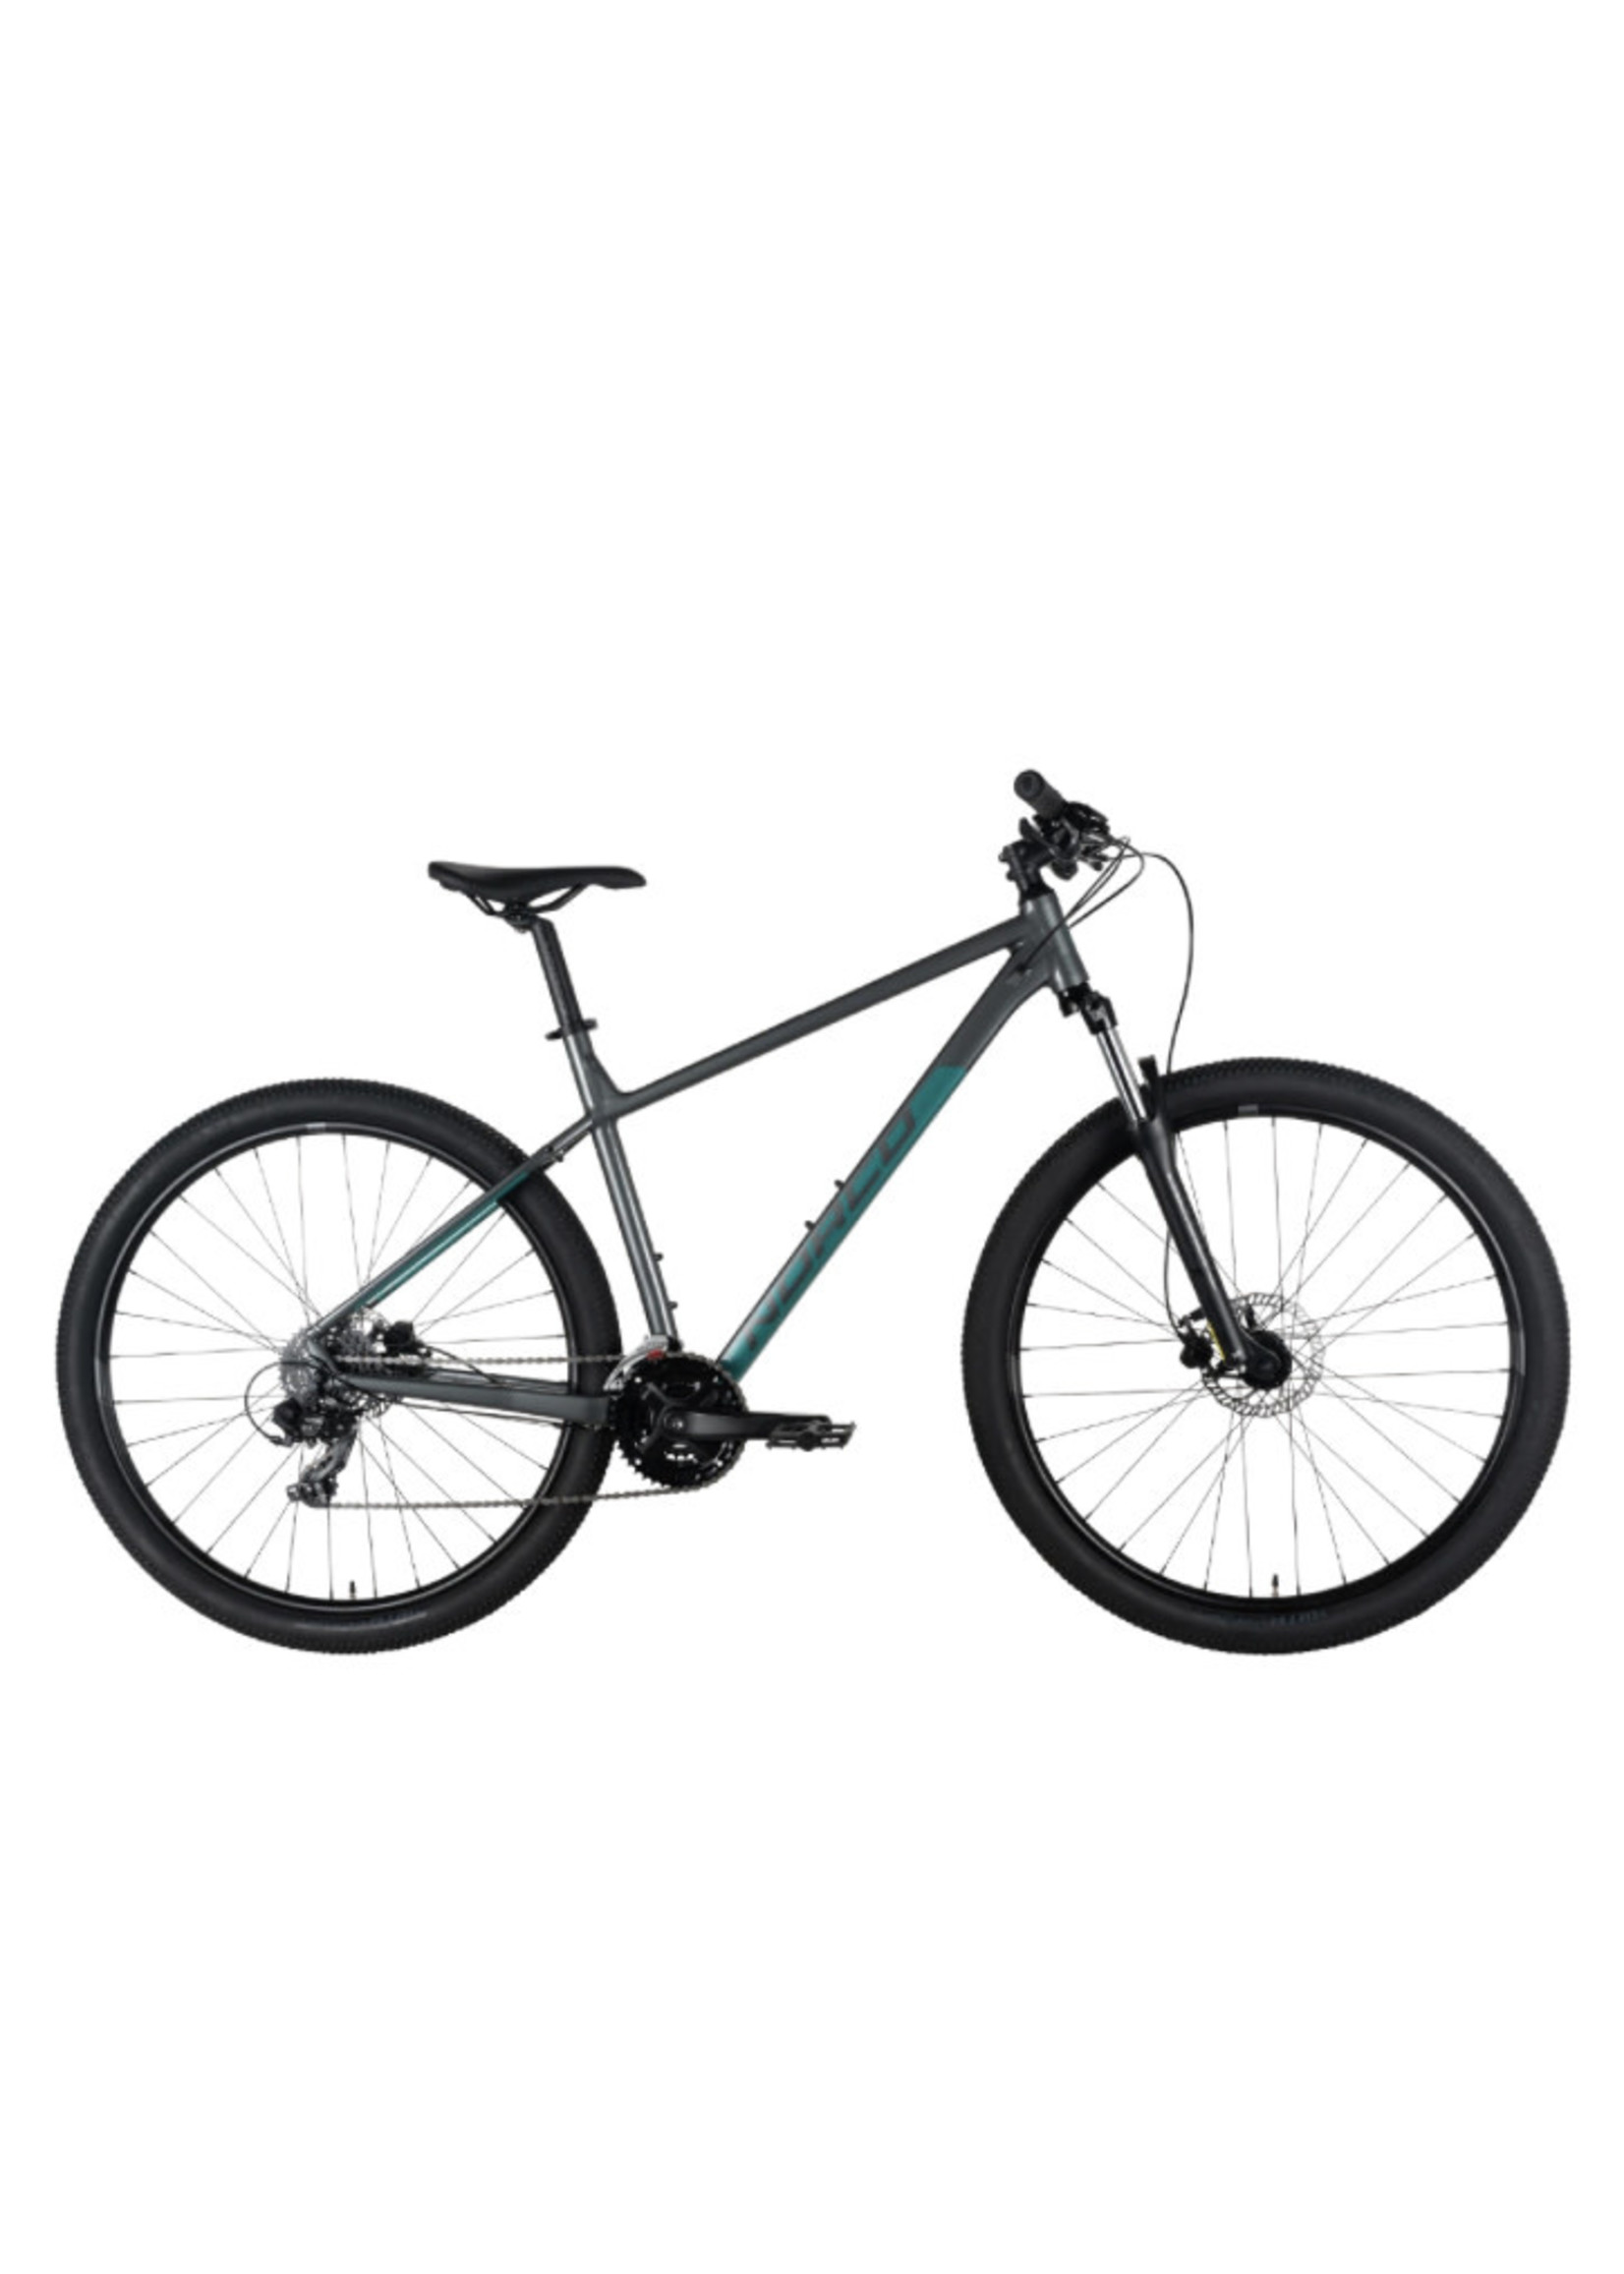 NORCO NORCO STORM 4 MED 27.5 BLK/GRN 21SP